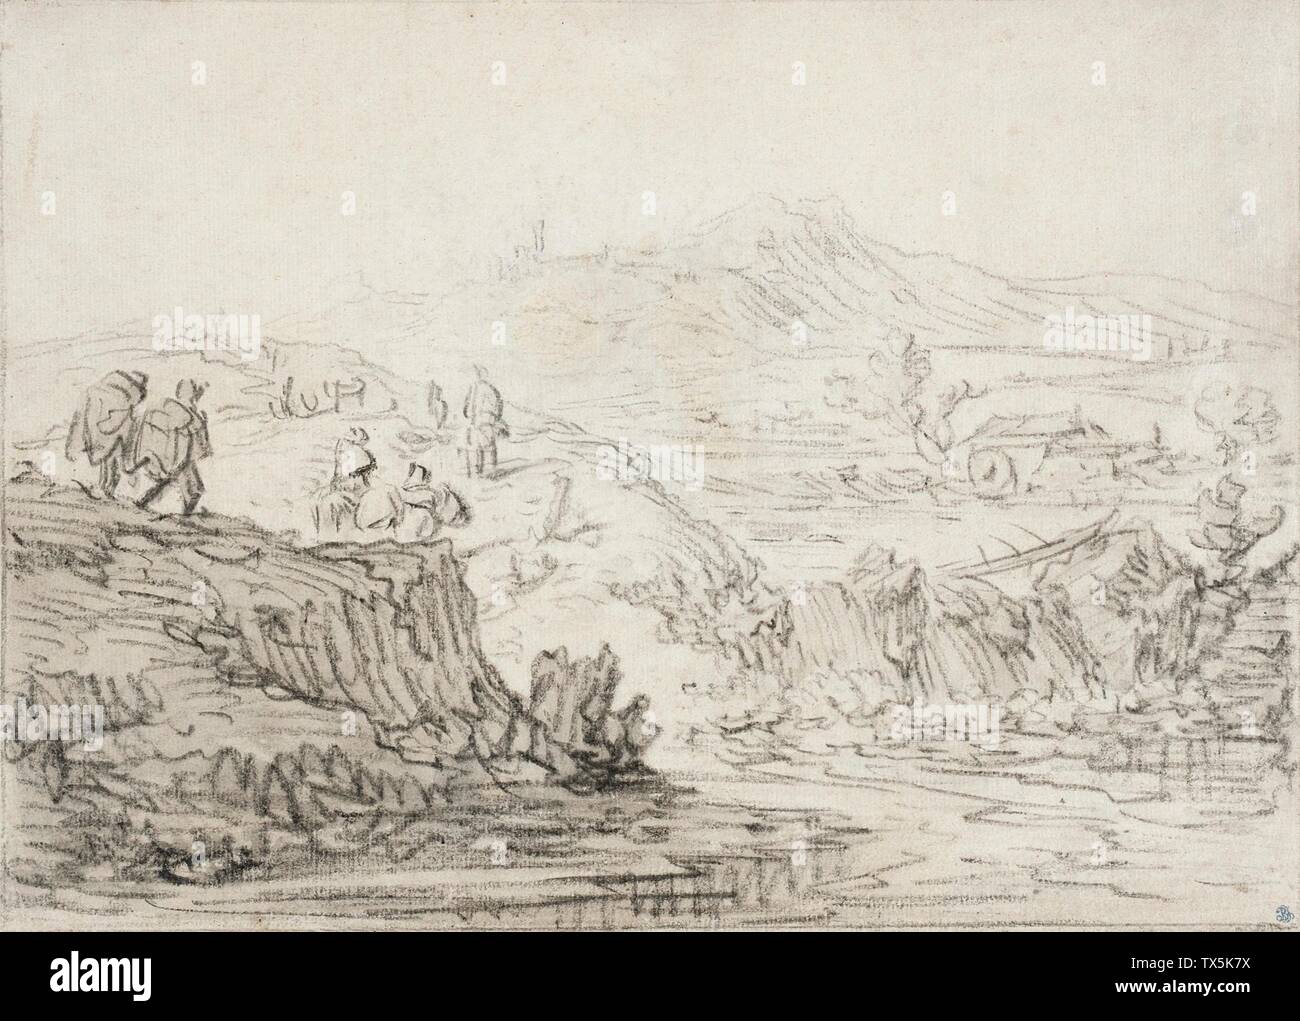 Hilly Landscape with Stream and Figures;  Holland, 1609 - 1685 Drawings Black chalk and gray wash Museum Purchase with County Funds (57.52.1) Prints and Drawings; between 1609 and 1685 date QS:P571,+1650-00-00T00:00:00Z/7,P1319,+1609-00-00T00:00:00Z/9,P1326,+1685-00-00T00:00:00Z/9; Stock Photo